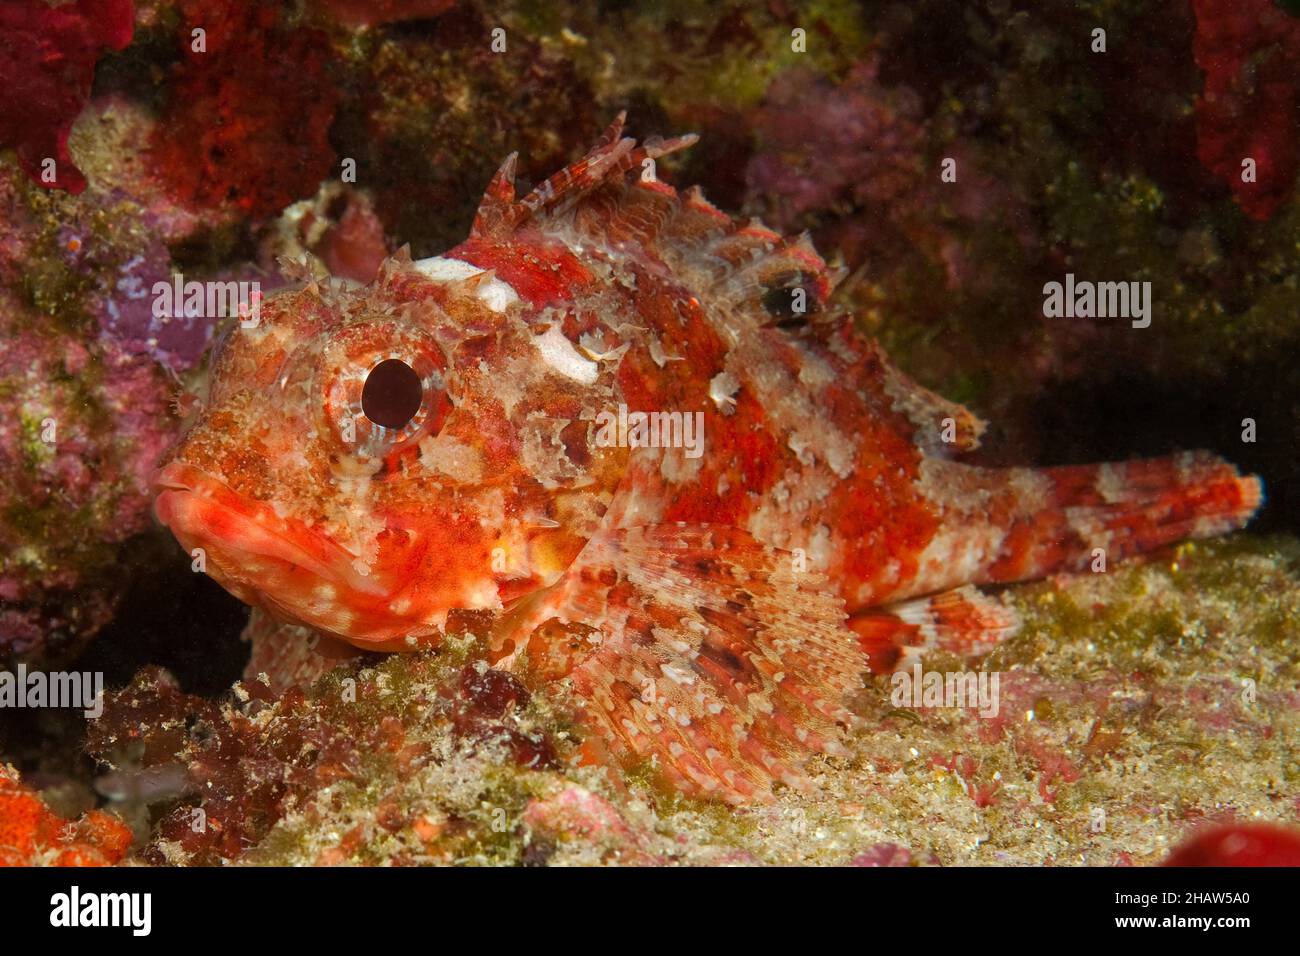 Close-up of small red scorpionfish (Scorpaena notata) with distinctive black spot on dorsal fin, Mediterranean Sea, Giglio, Tuscany, Italy Stock Photo